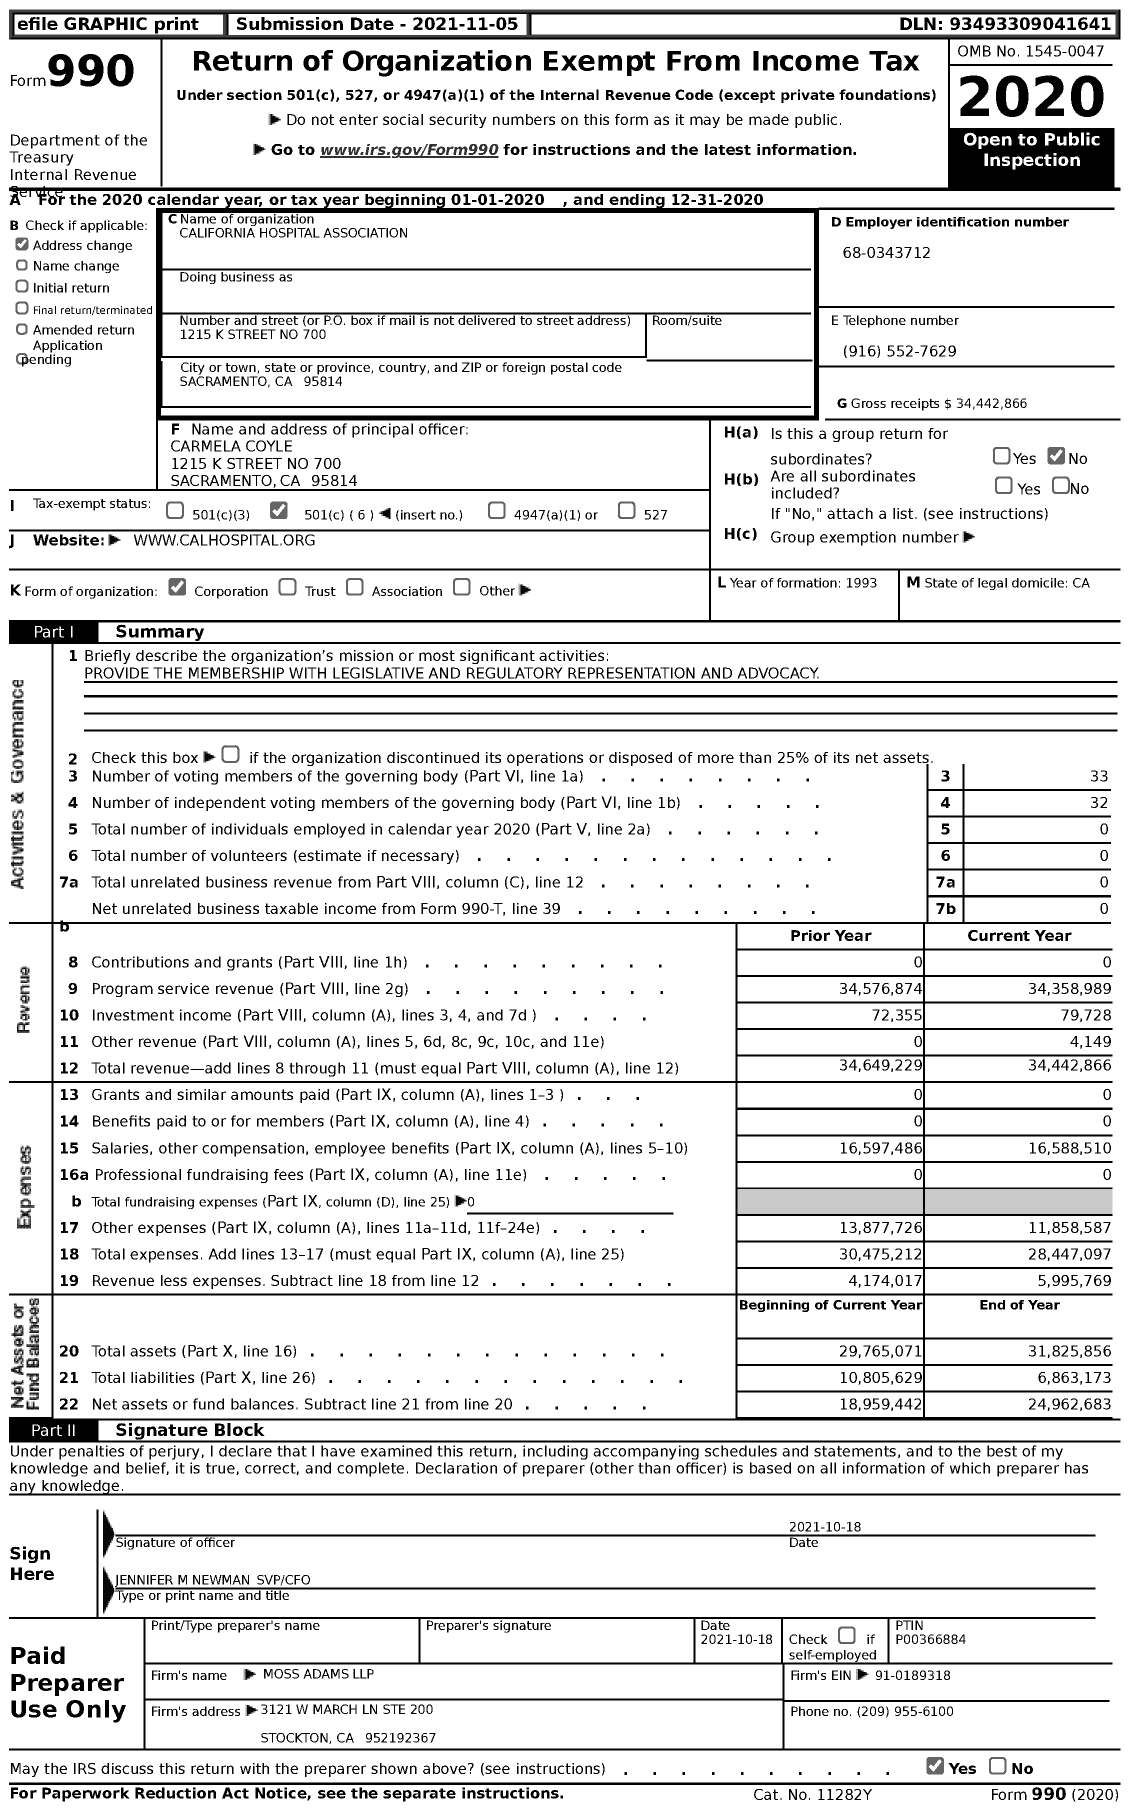 Image of first page of 2020 Form 990 for California Hospital Association (CHA)